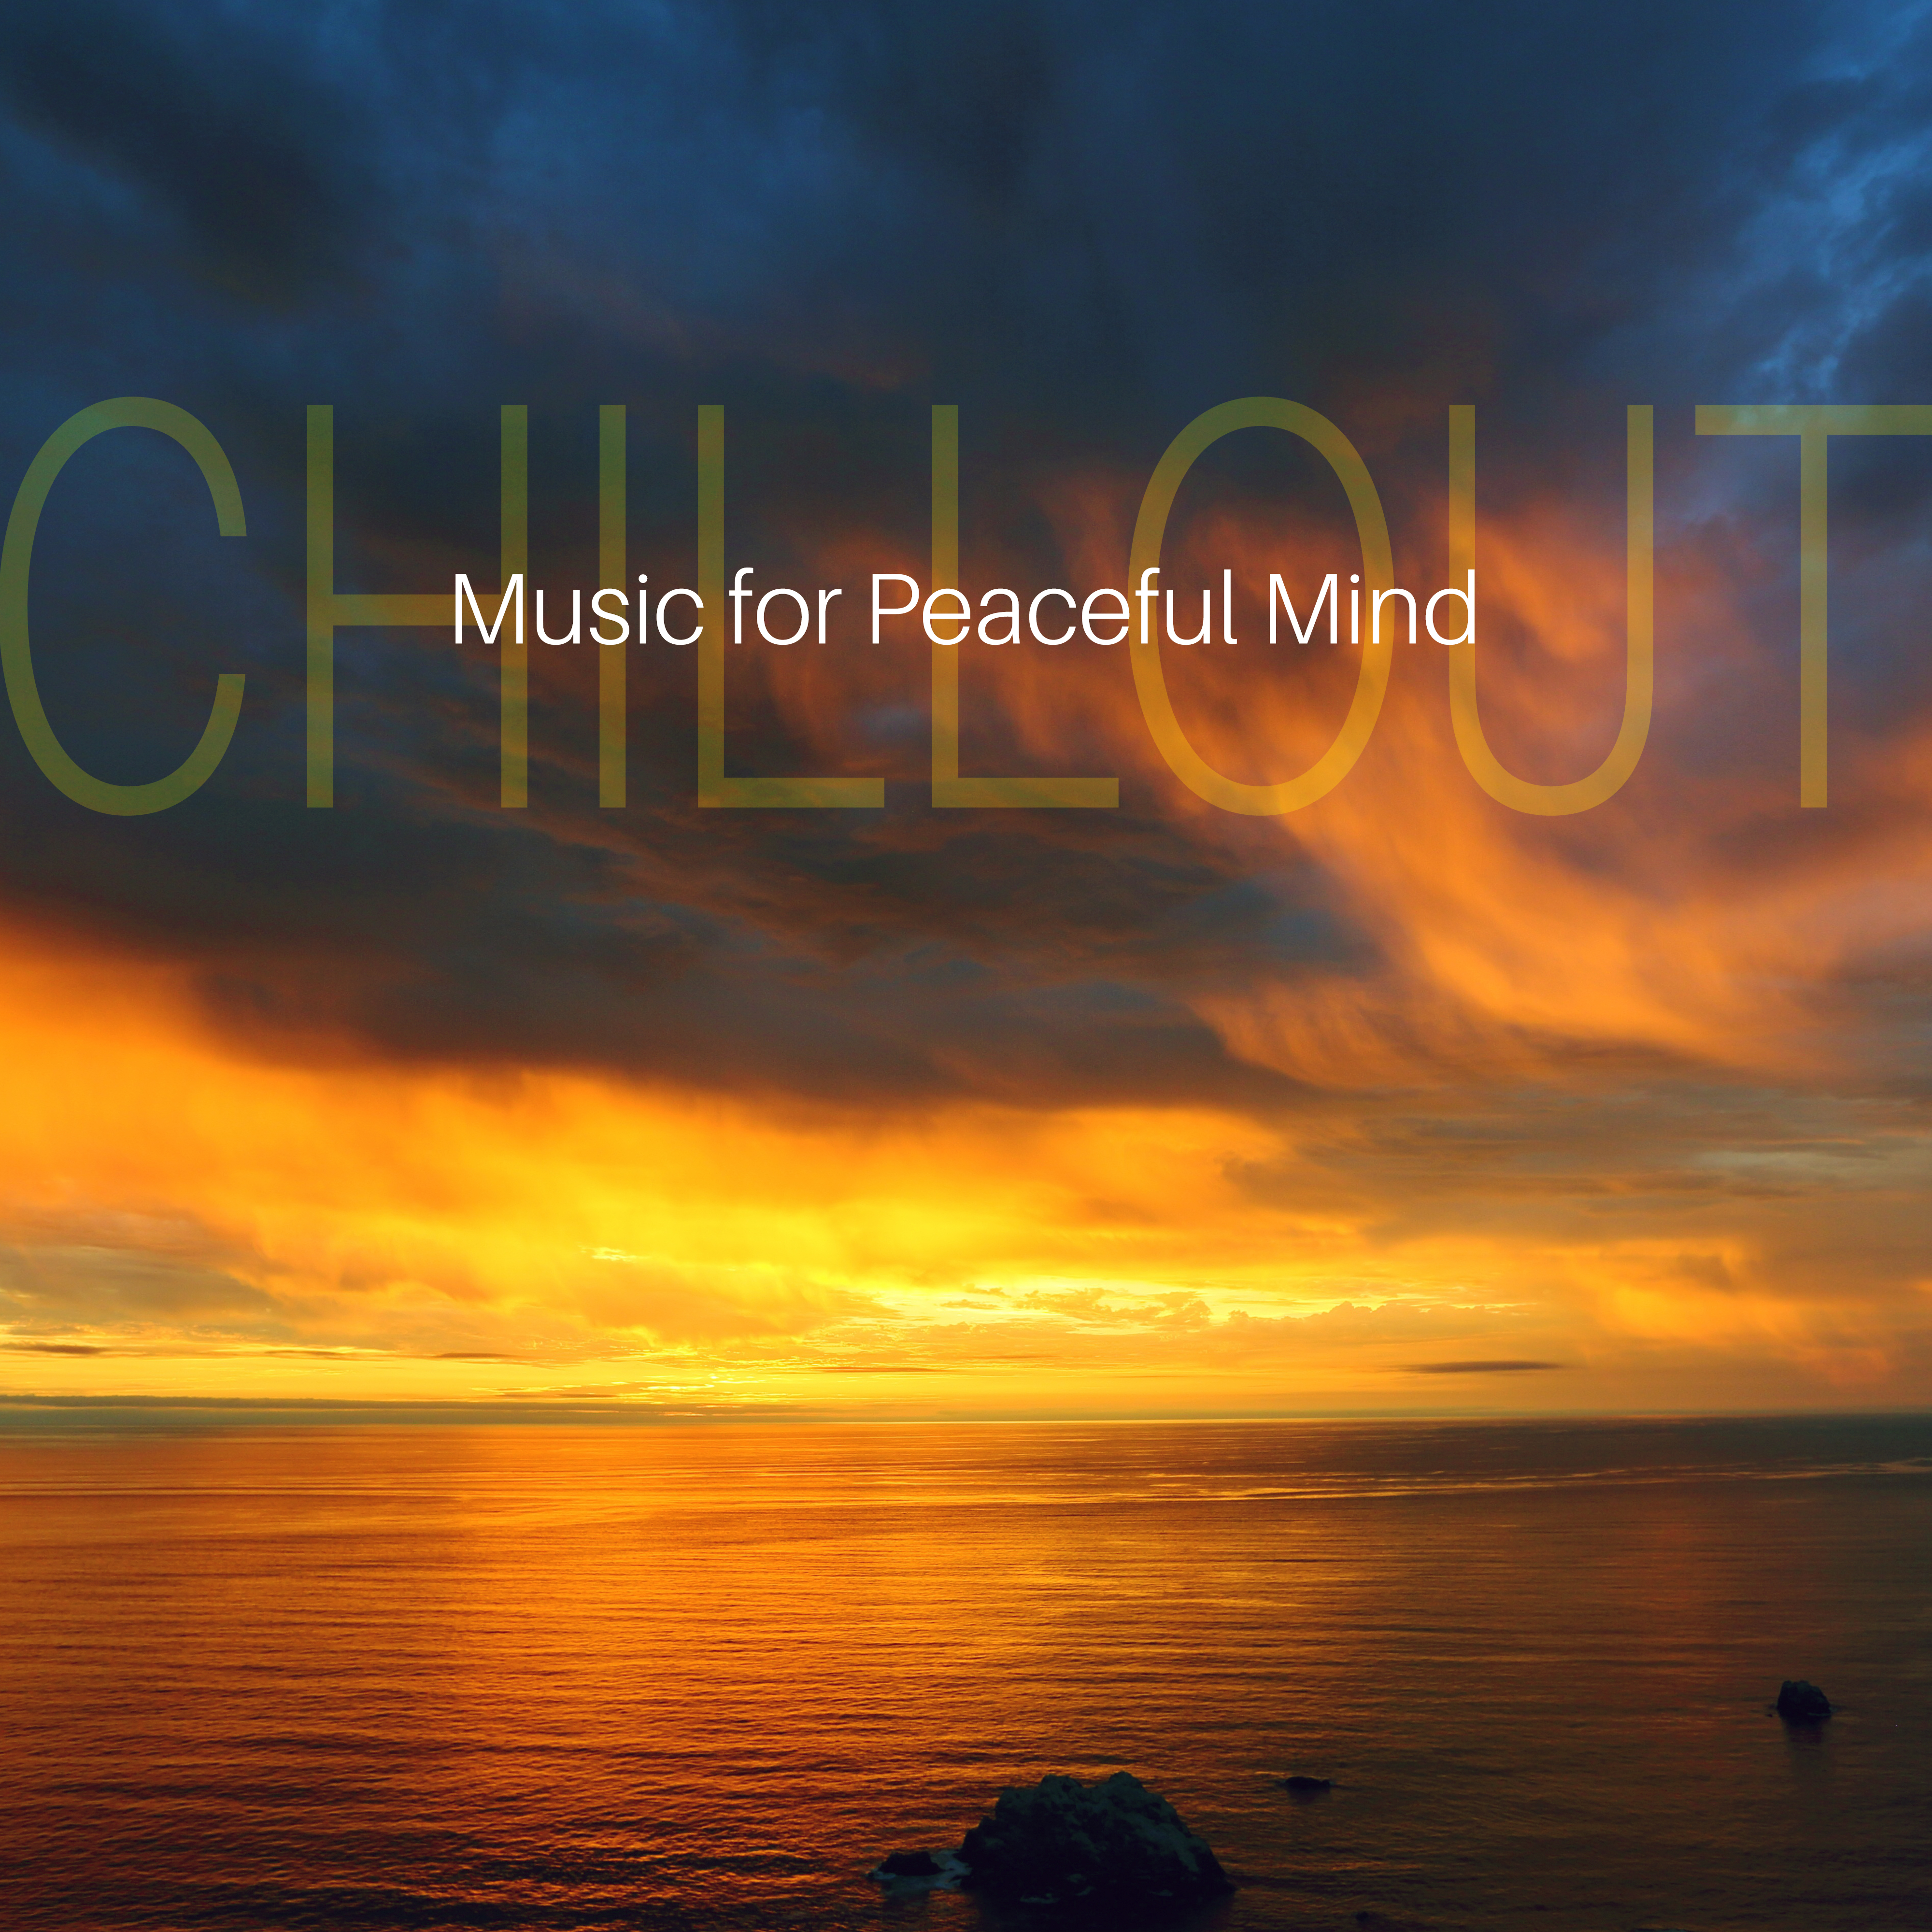 Chill Out Music for Peaceful Mind – Sunny Chill Out, Music to Relax, Rest a Bit, Chilled Songs